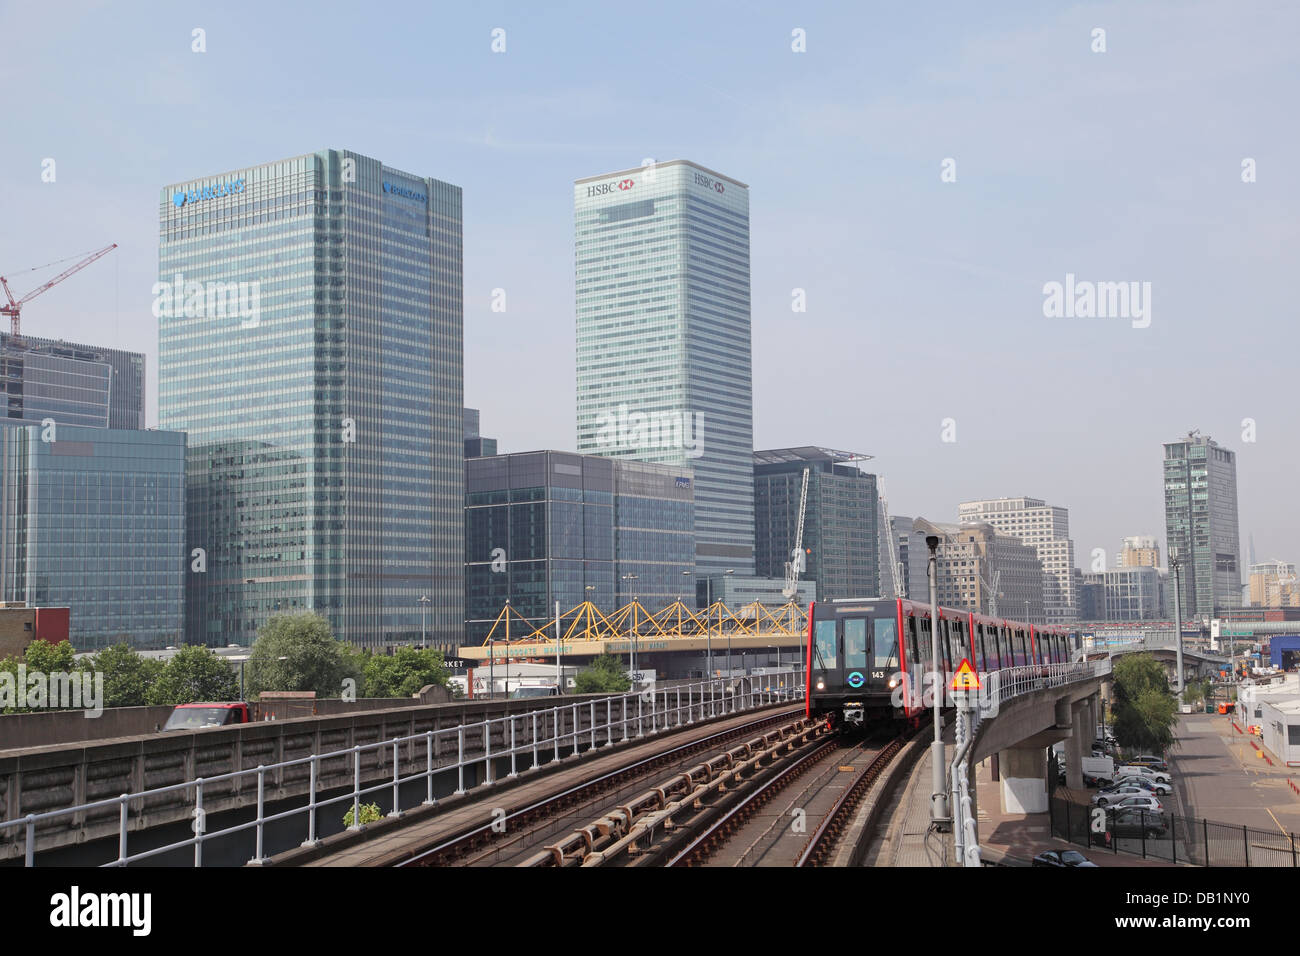 A London Docklands Light Railway train approaches Blackwall  station. Canary Wharf business district in the background Stock Photo